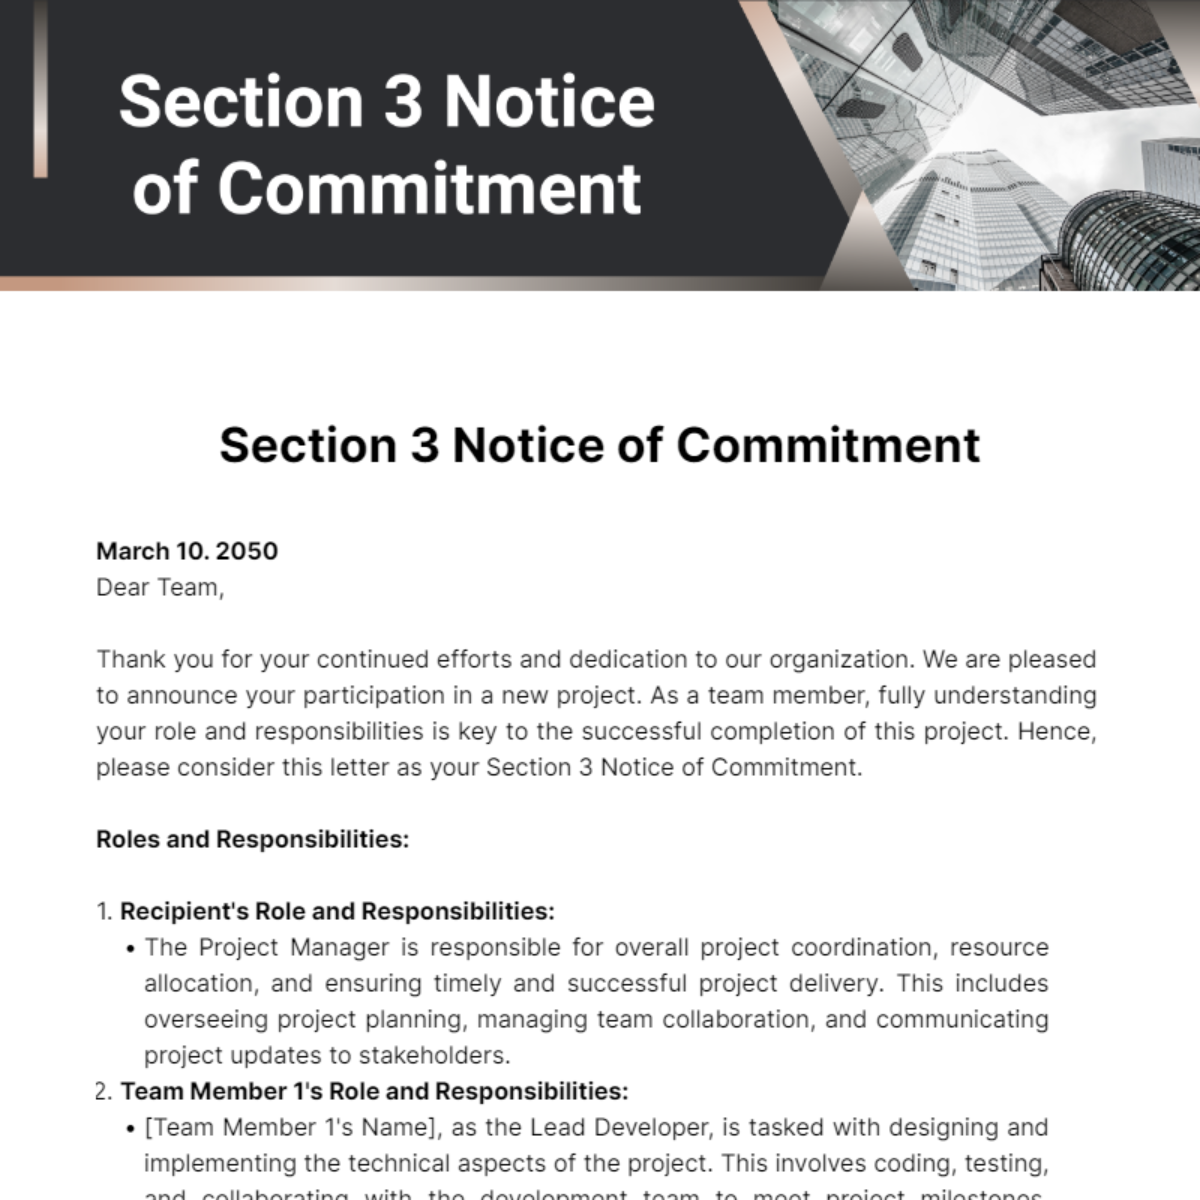 Section 3 Notice of Commitment Template